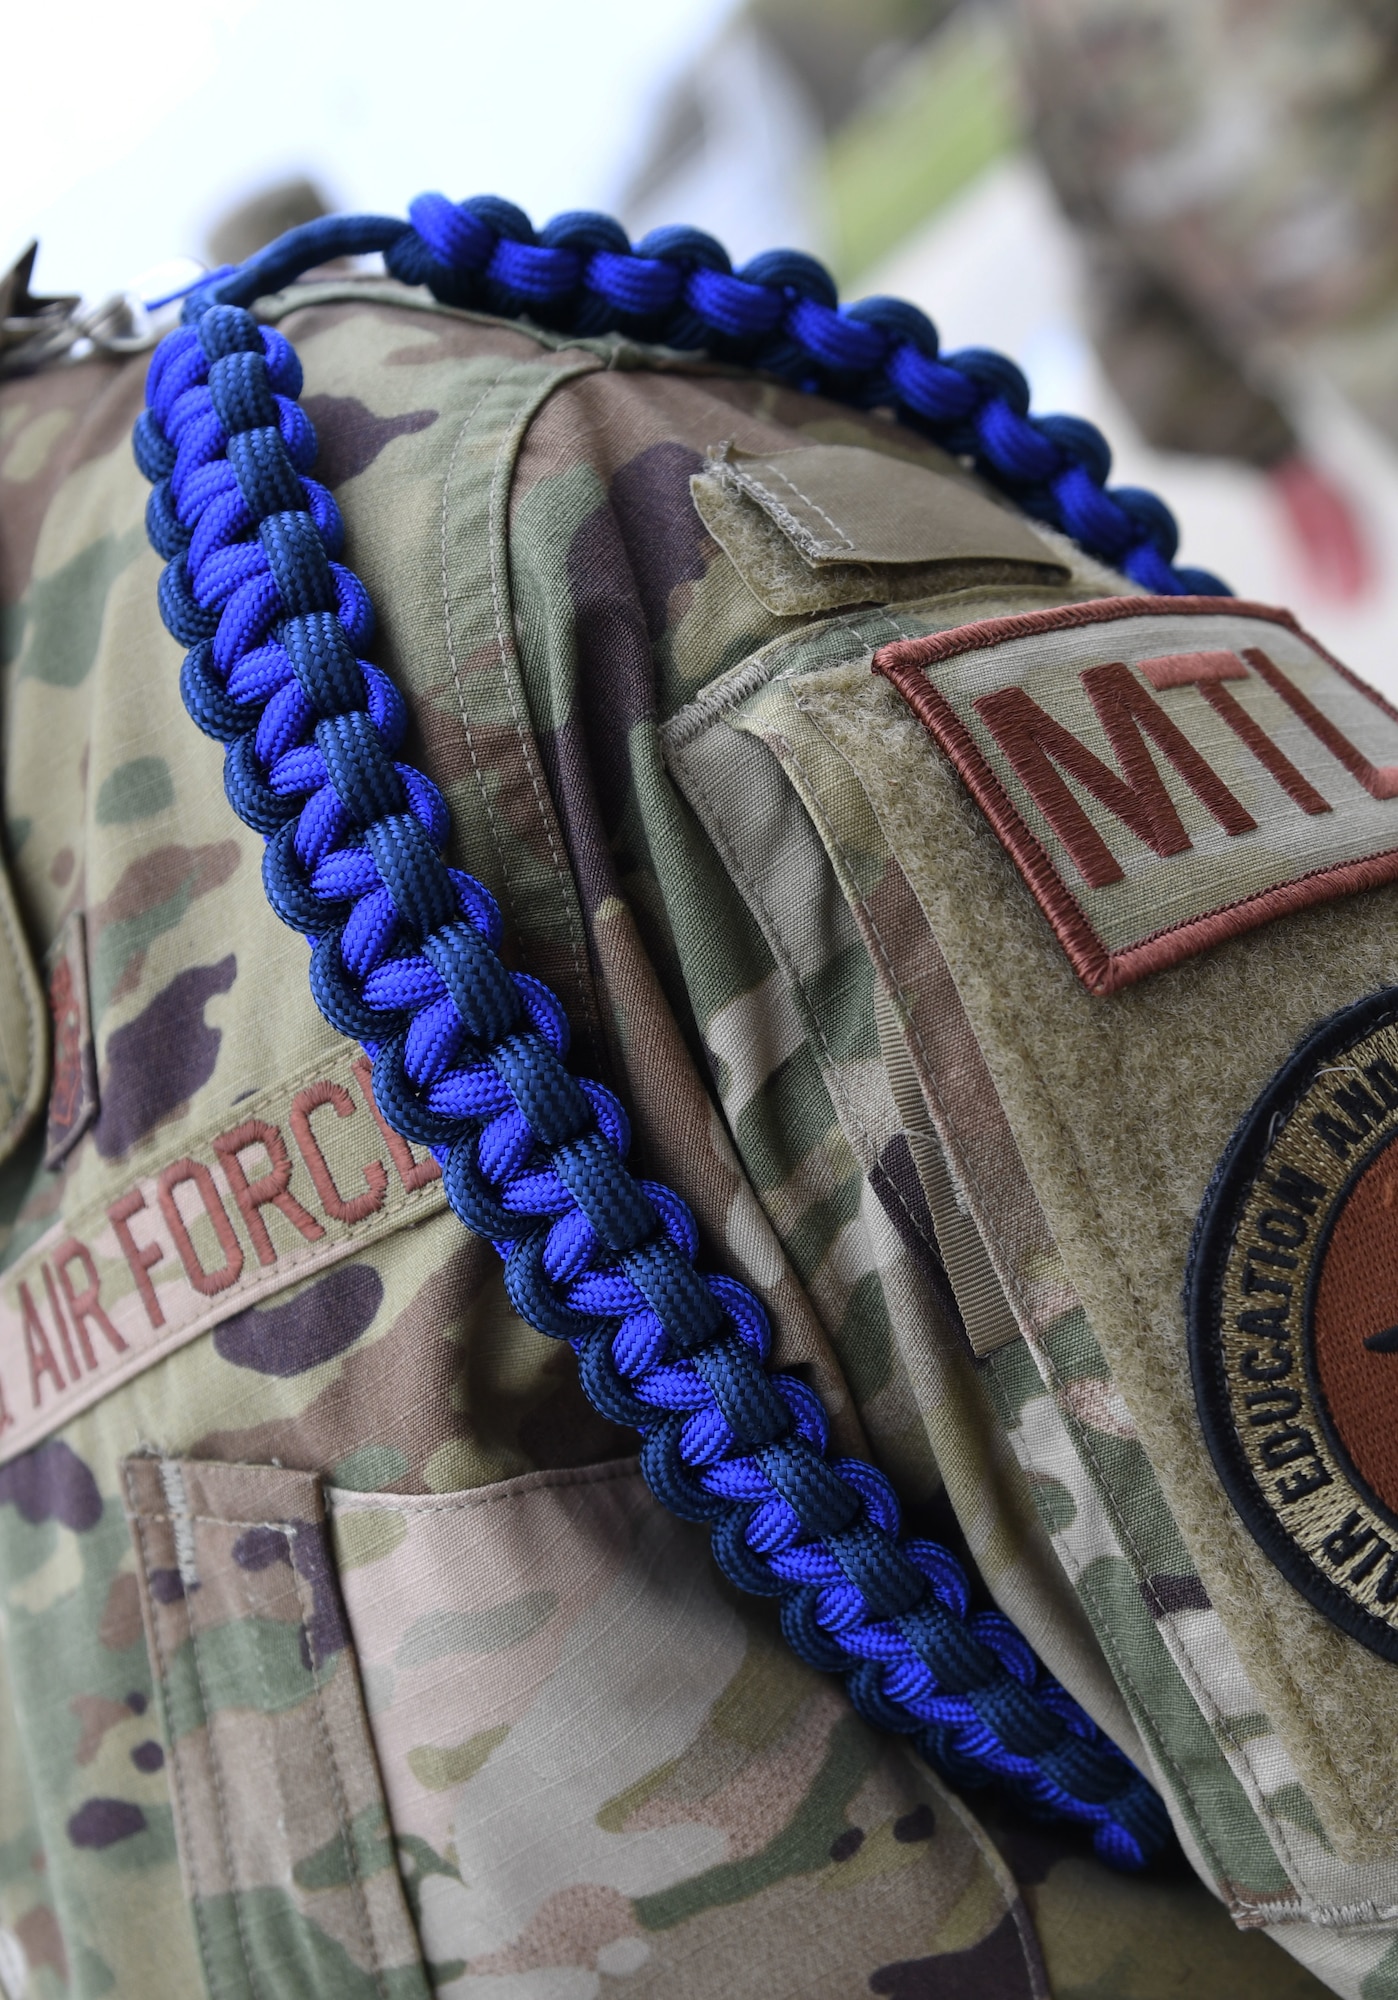 U.S. Air Force Master Sgt. Jessica Johnson, 81st Training Support Squadron military training leader school instructor supervisor, wears a Master Military Training Leader rope outside the Levitow Training Support Facility at Keesler Air Force Base, Mississippi, March 19, 2021. The Master Military Training Leader Program, created at Keesler, was designed to distinguish the military training leaders who have mastered the demonstration, evaluation and reinforcement of military standards; exude military bearing and discipline while scheduling and conducting military training; and are key leaders among Airmen and their peers. (U.S. Air Force photo by Kemberly Groue)